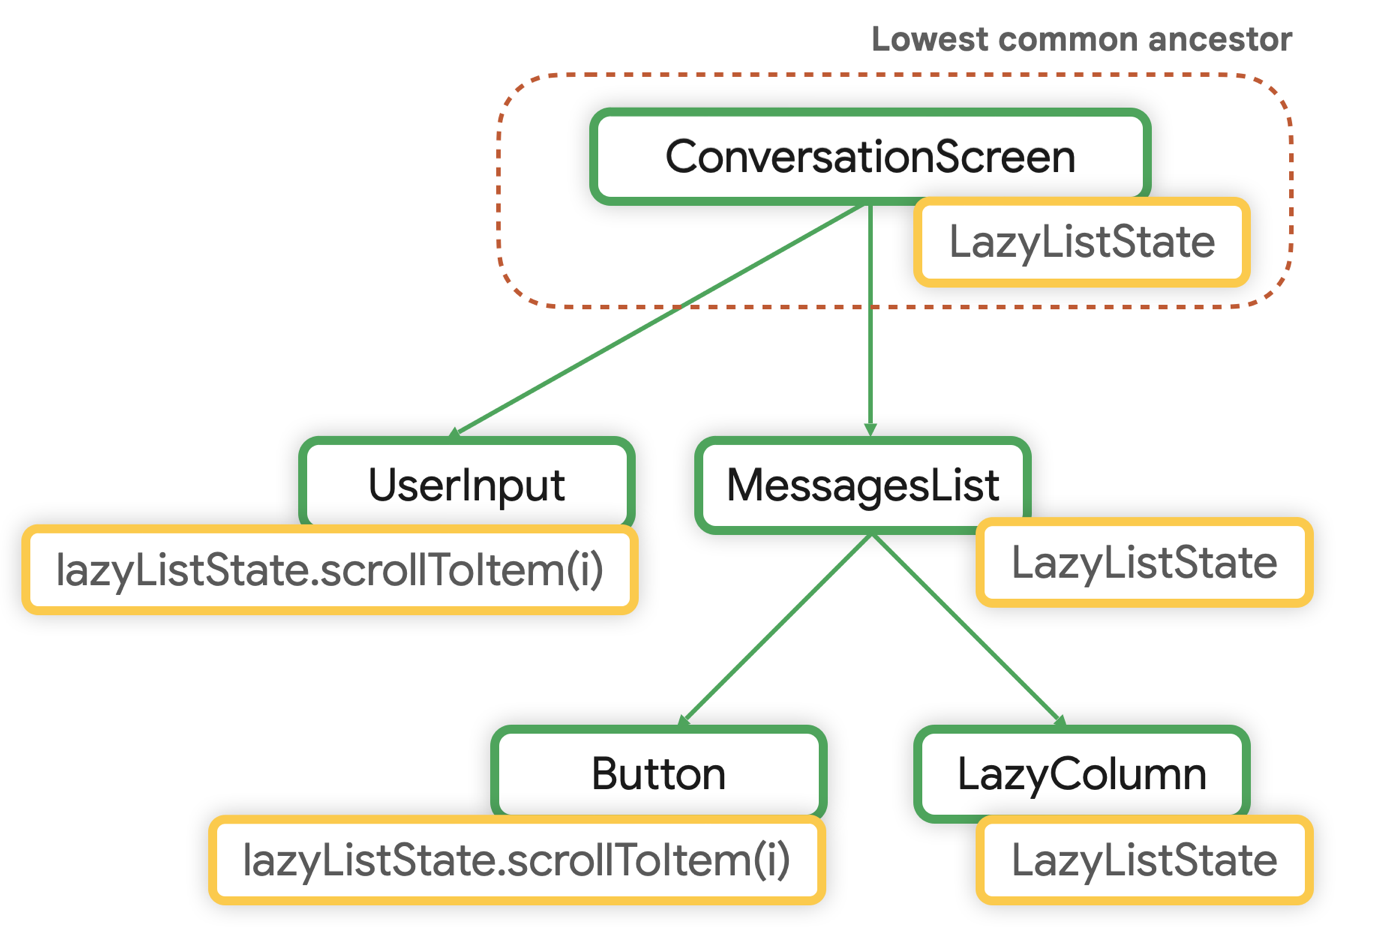 Lowest common ancestor for LazyListState is ConversationScreen